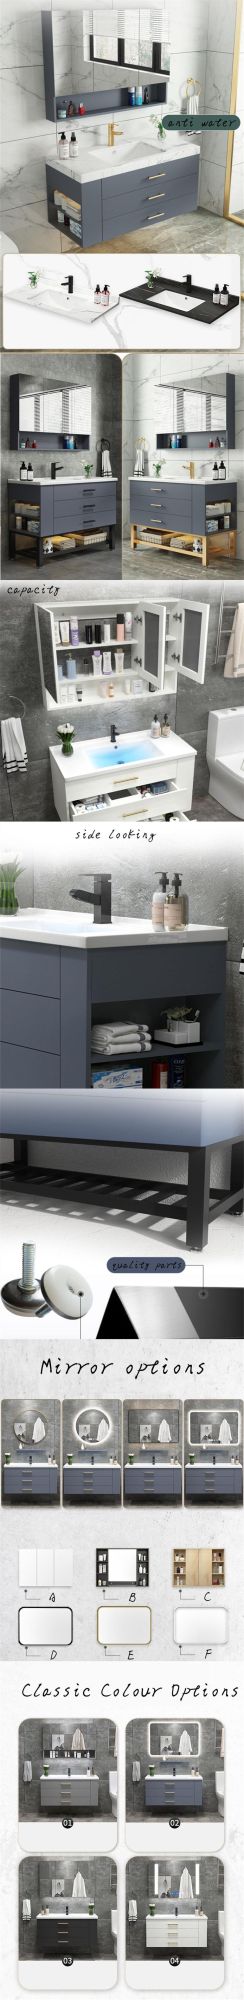 Wall Mounted Bathroom Vanity Cabinet with Glass Mirror Wholesale Cabinets